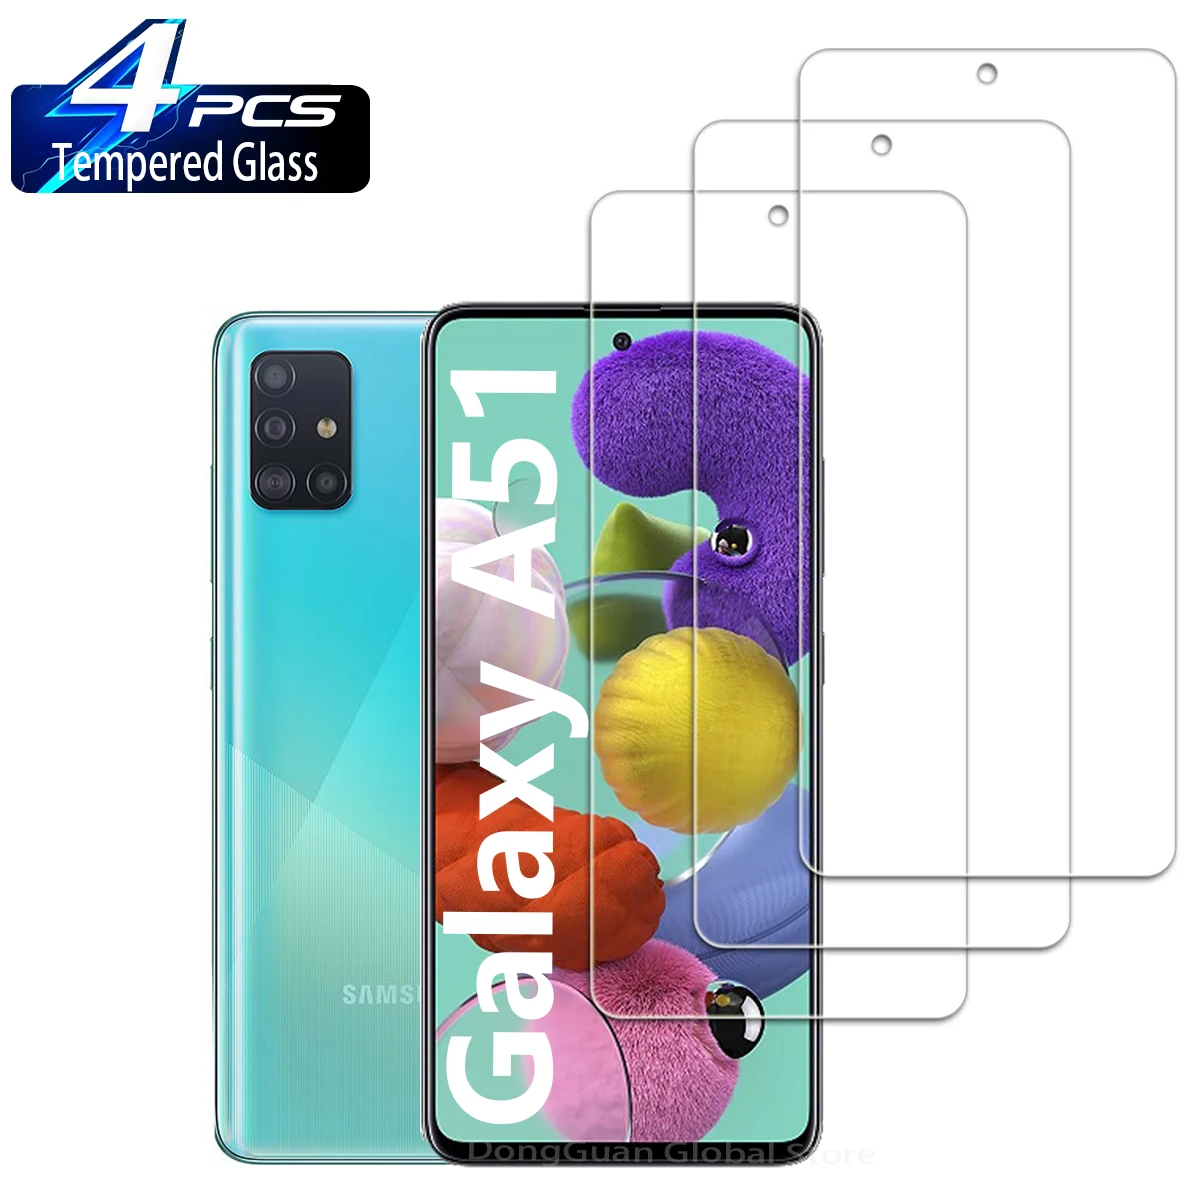 2/4Pcs Tempered Glass For Samsung Galaxy A51 Screen Protector Glass Film 2 4pcs 0 2mm tempered glass for samsung galaxy s21 fe 5g screen protector glass film